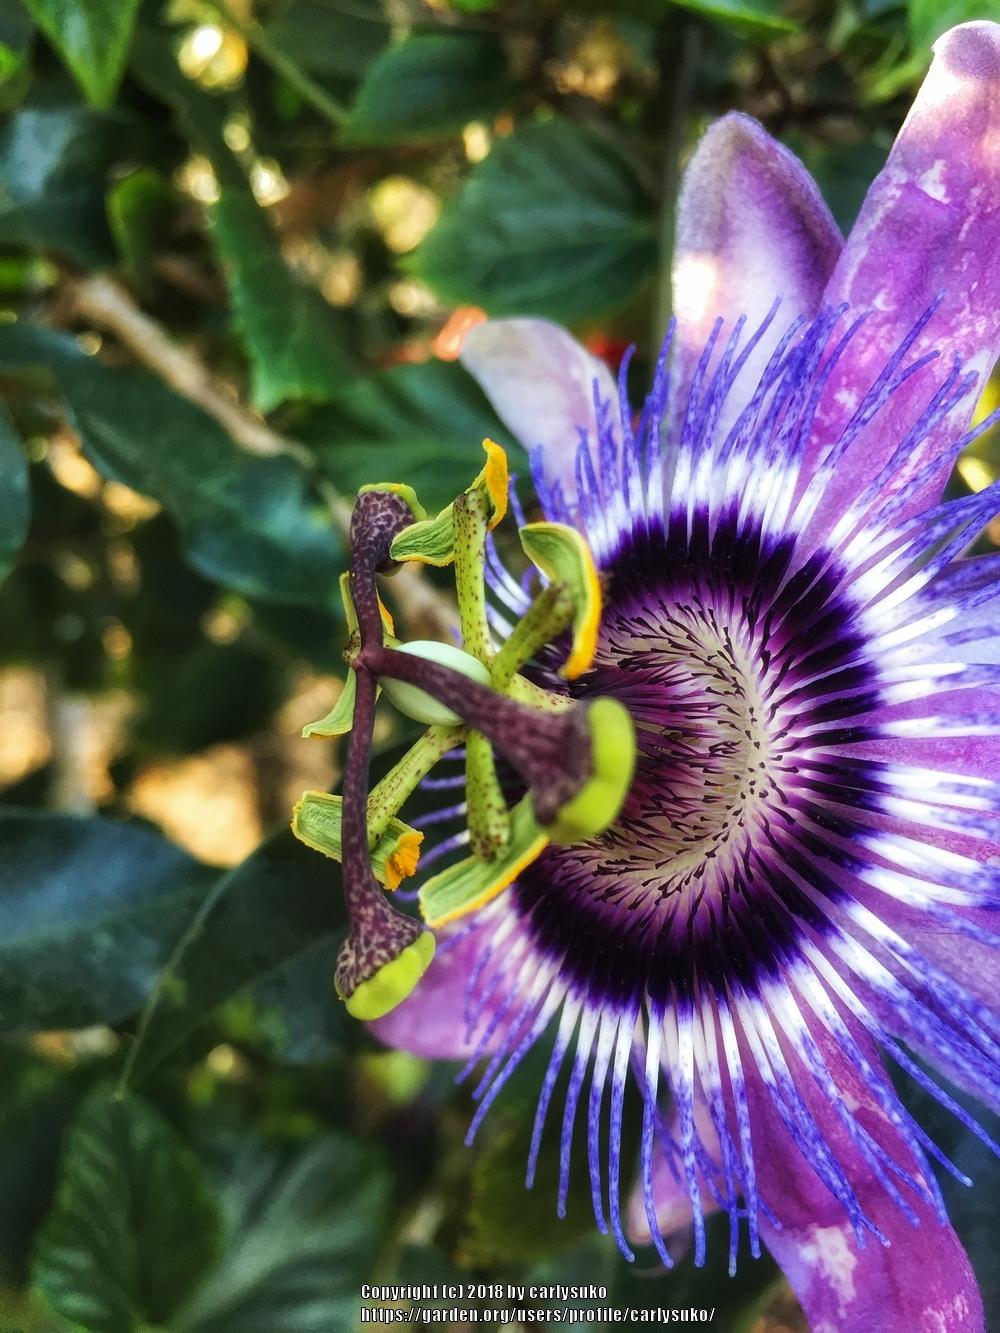 Photo of Passion Flower (Passiflora) uploaded by carlysuko